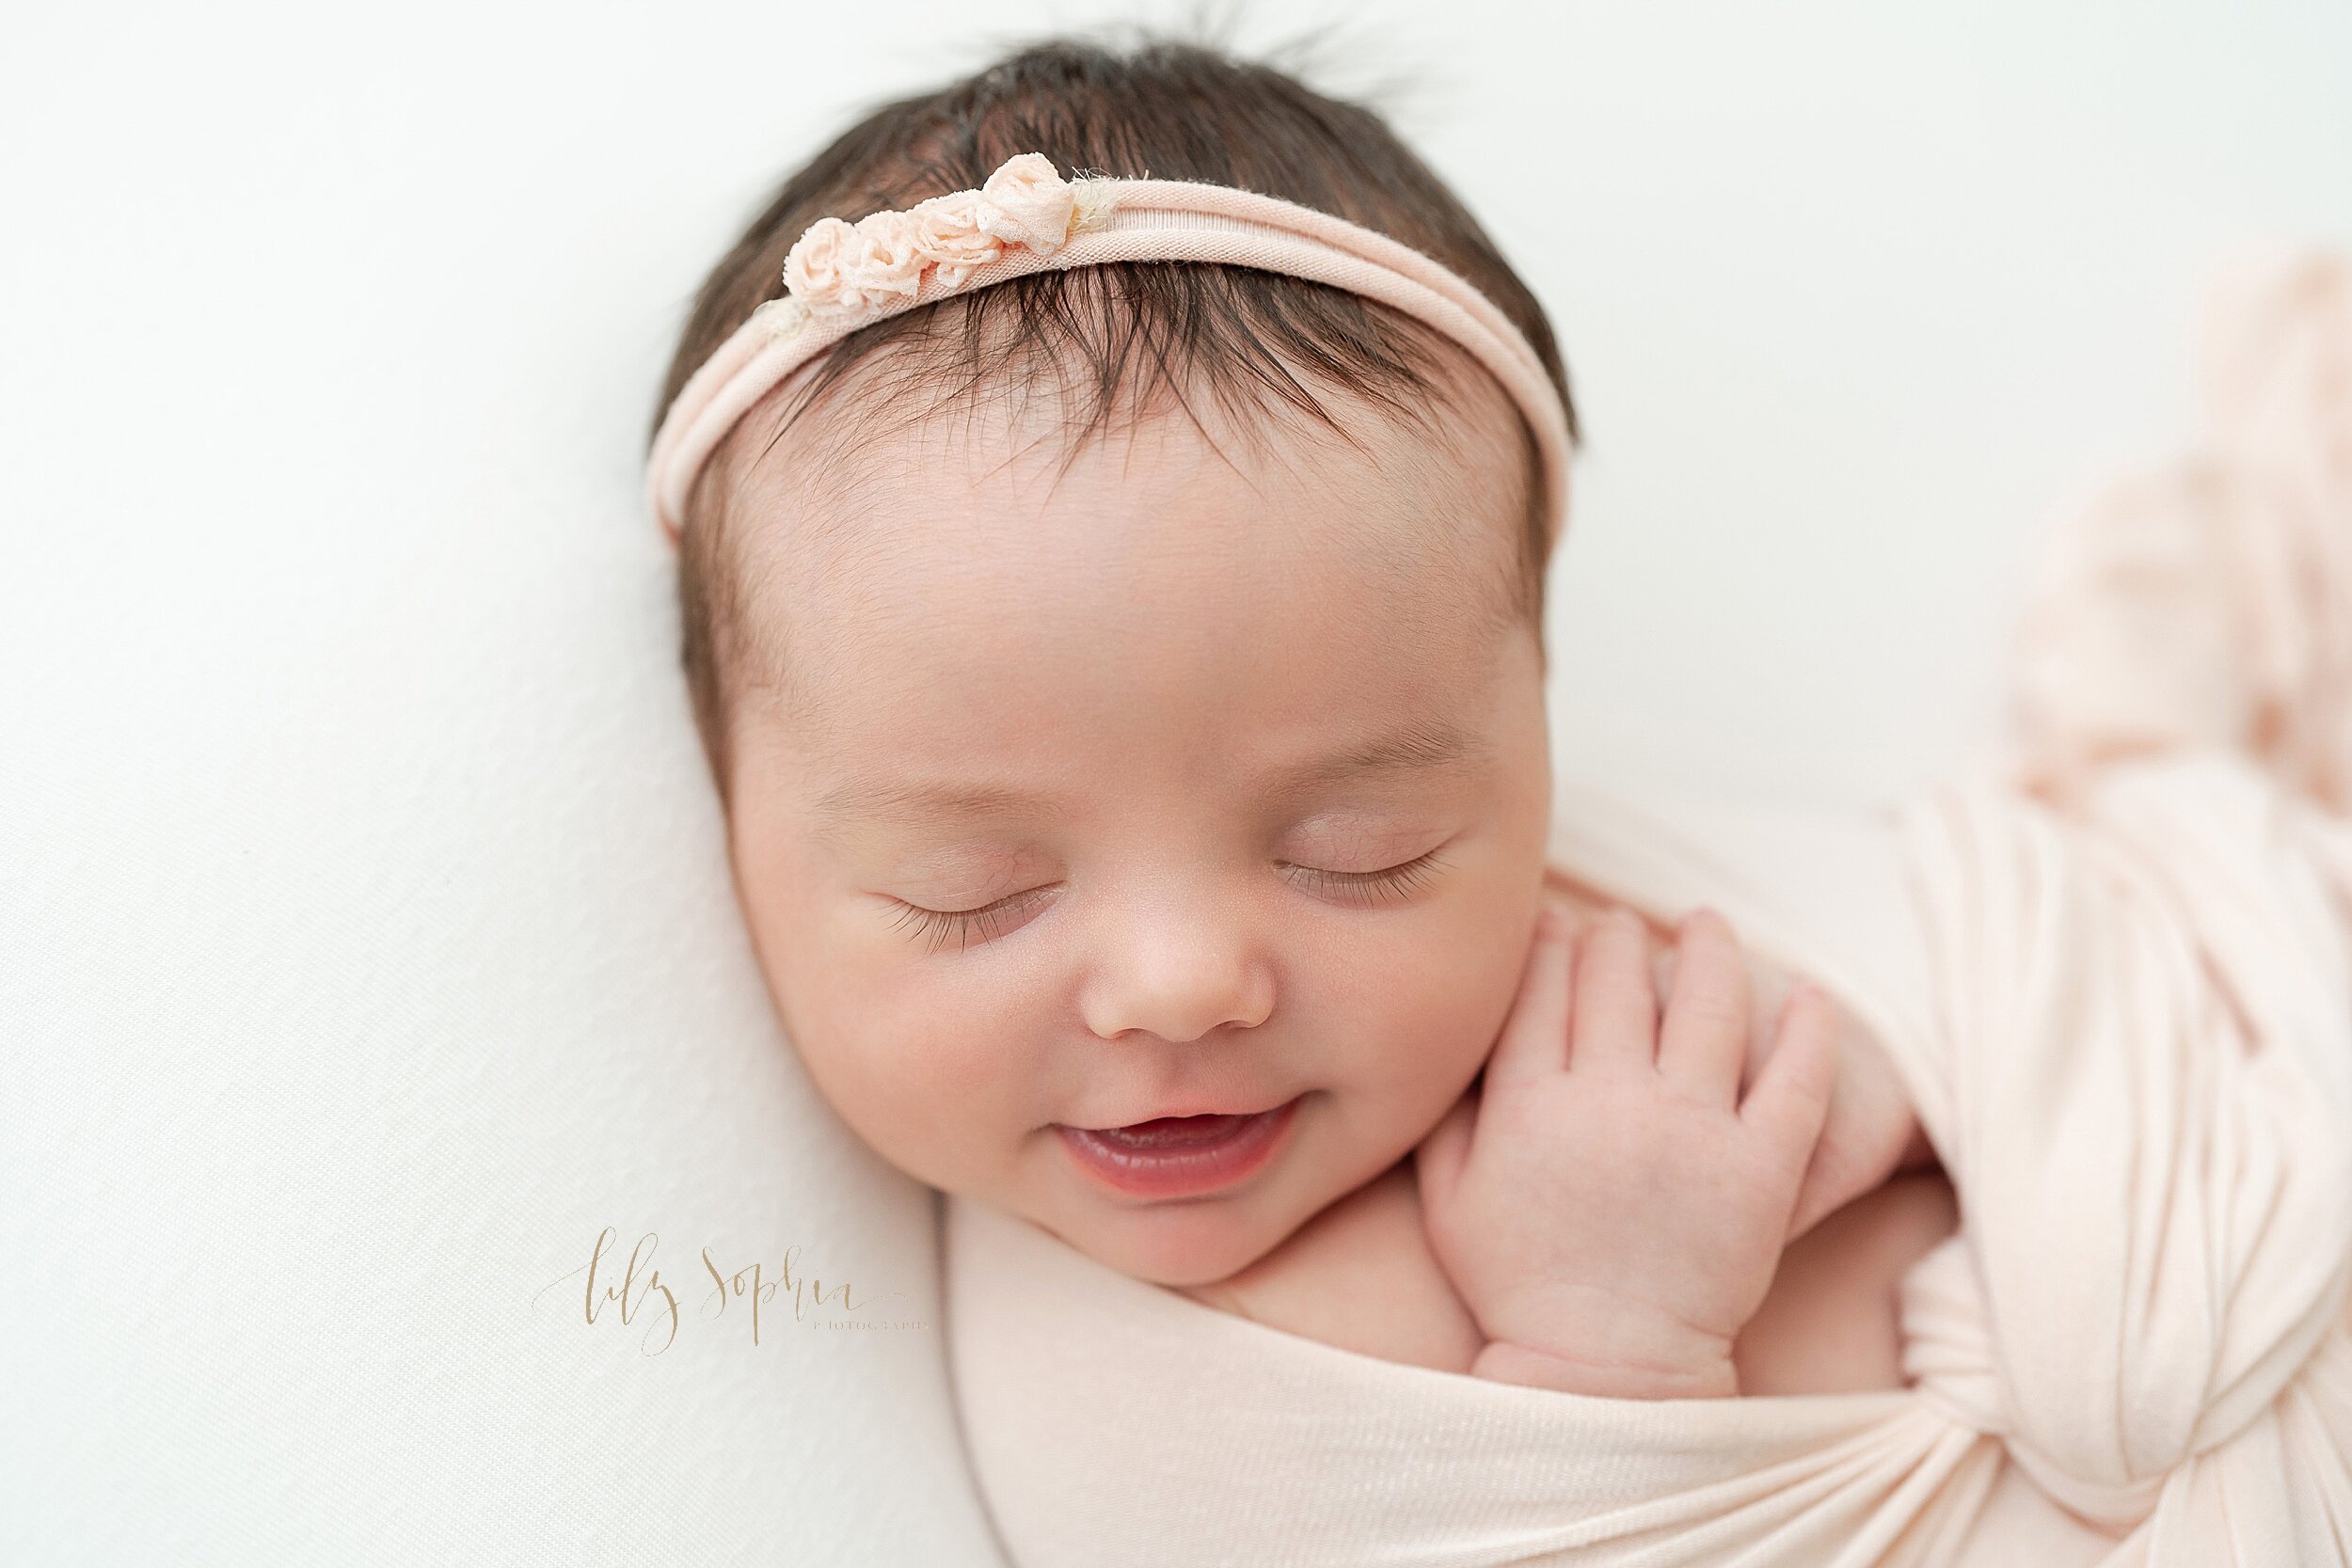  Newborn photo of a sleeping and smiling baby girl as she sleeps with a stretchy headband in her wispy hair and wrapped in a stretchy swaddle taken in a studio near the Old Fourth Ward area of Atlanta in natural light. 